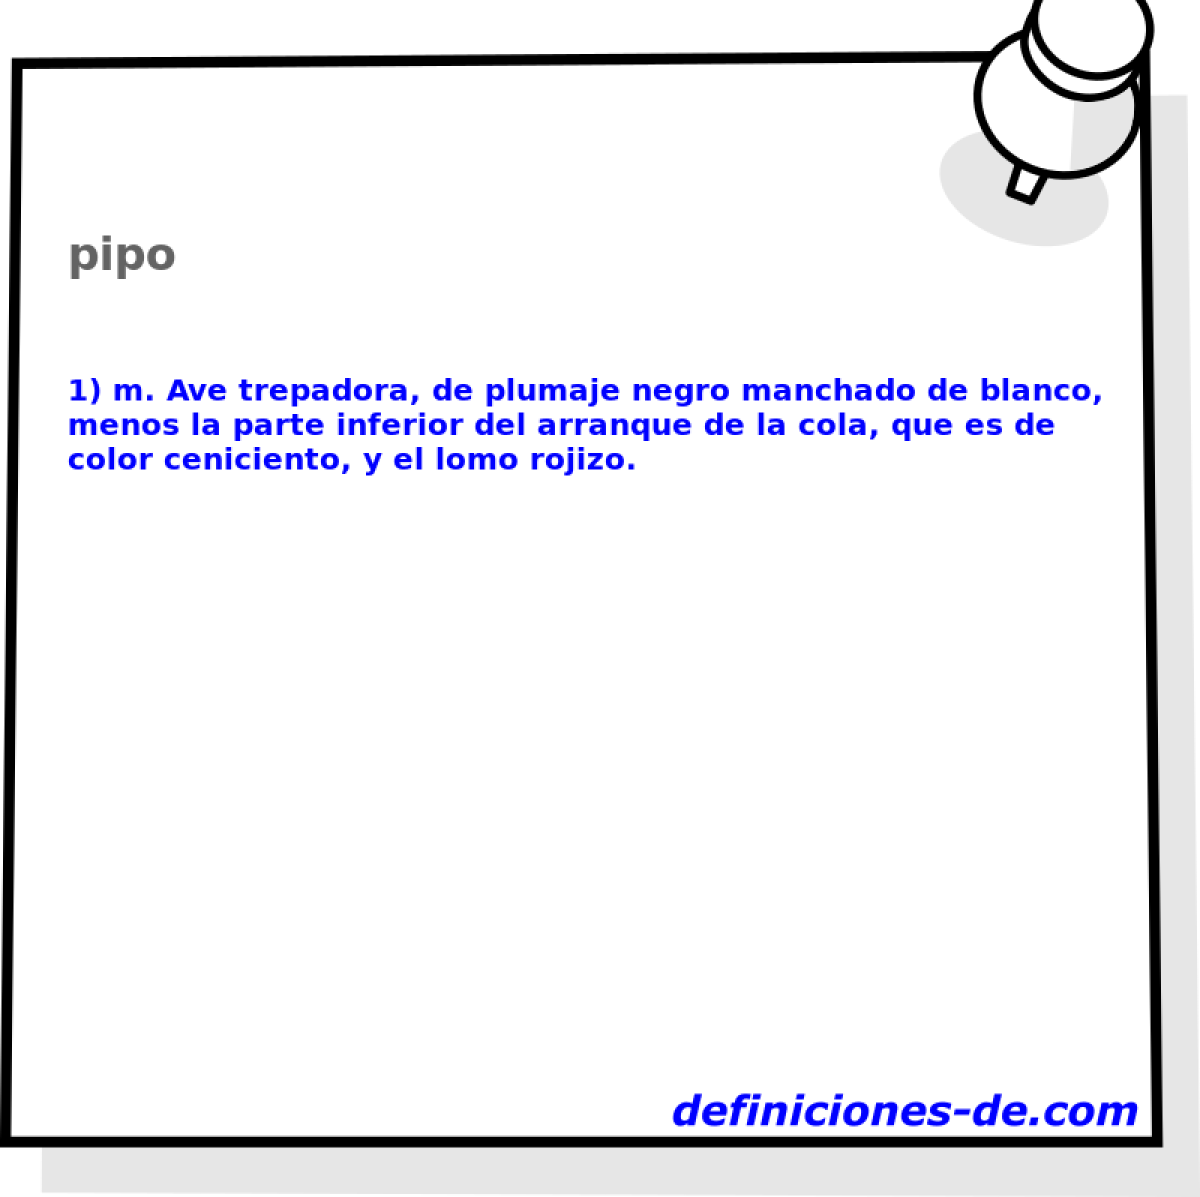 pipo 